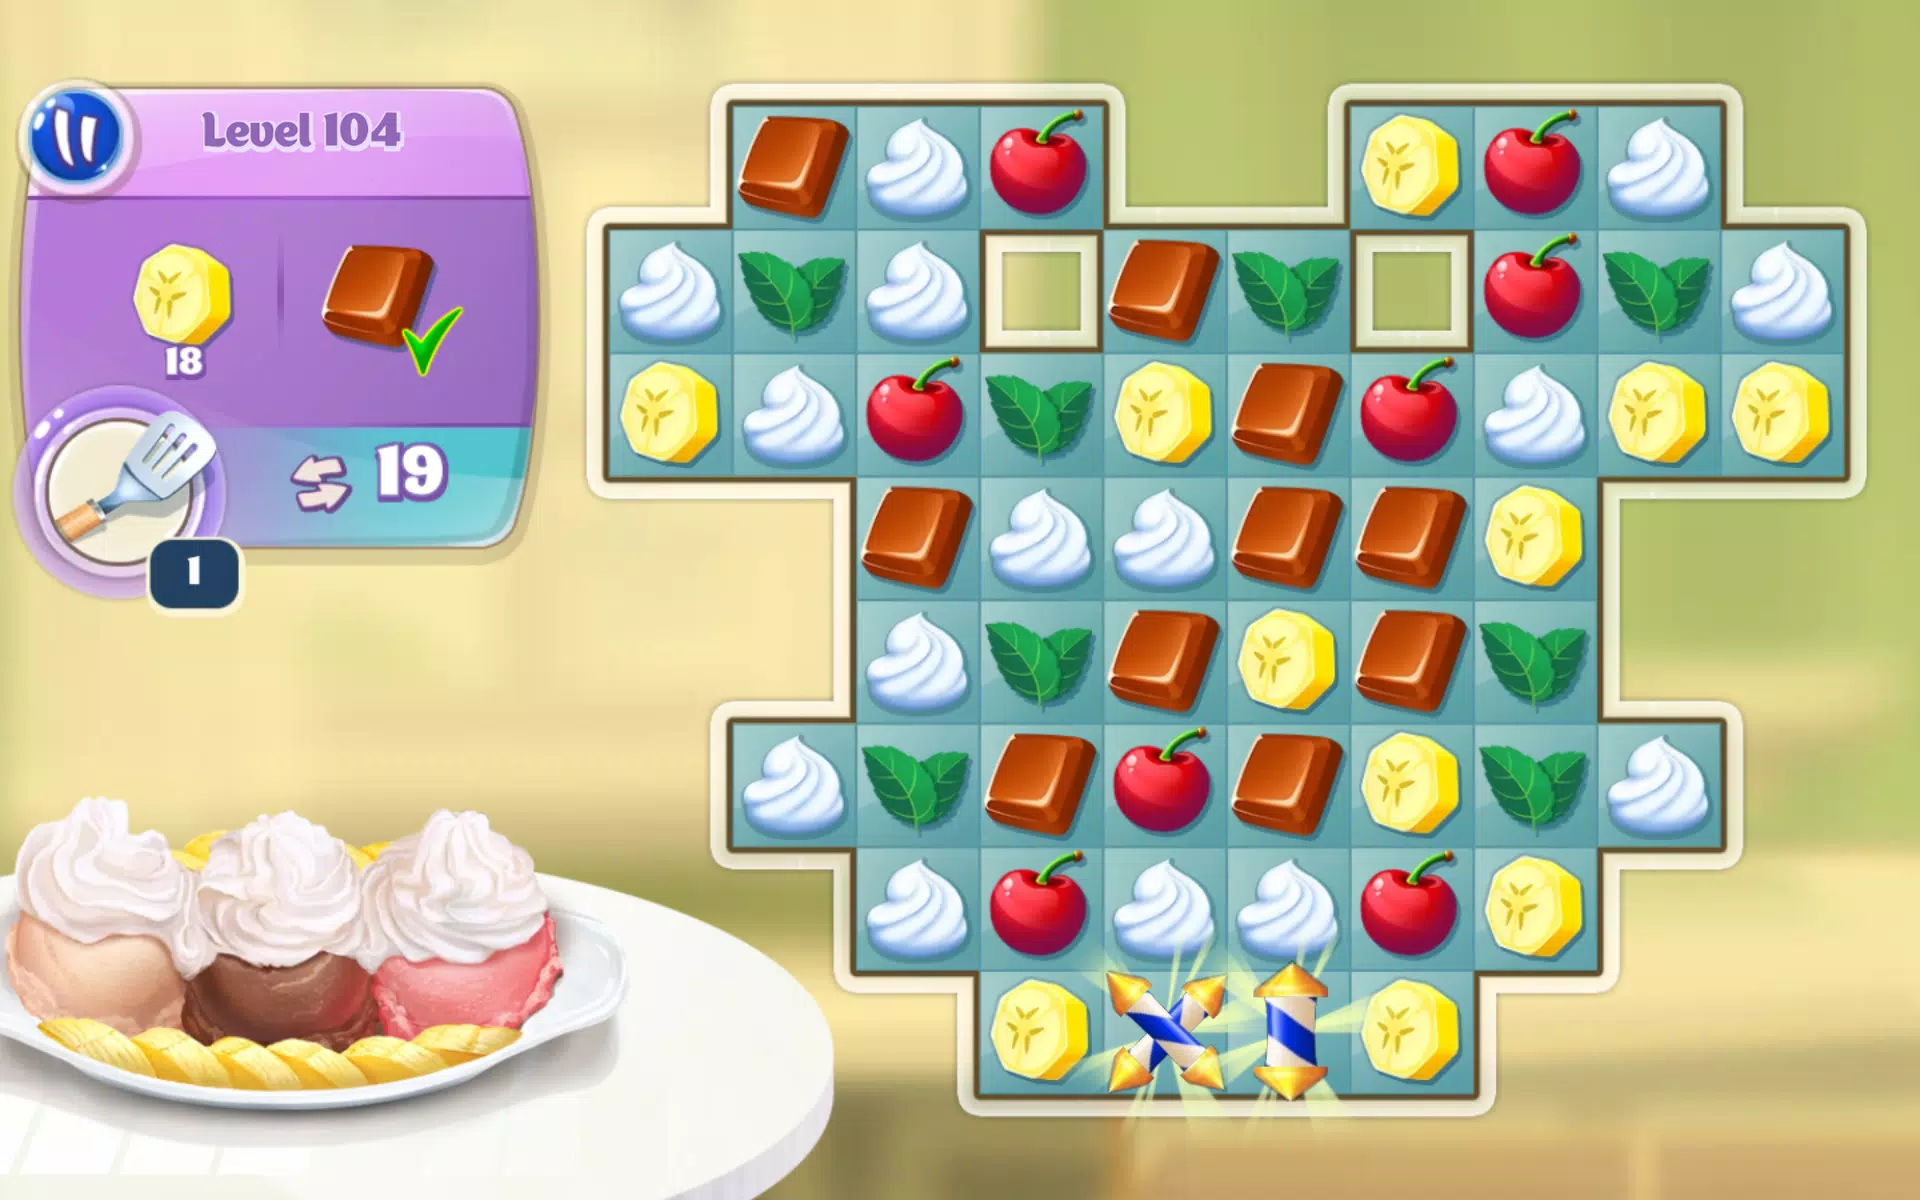 Bake a cake puzzles & recipes APK for Android Download